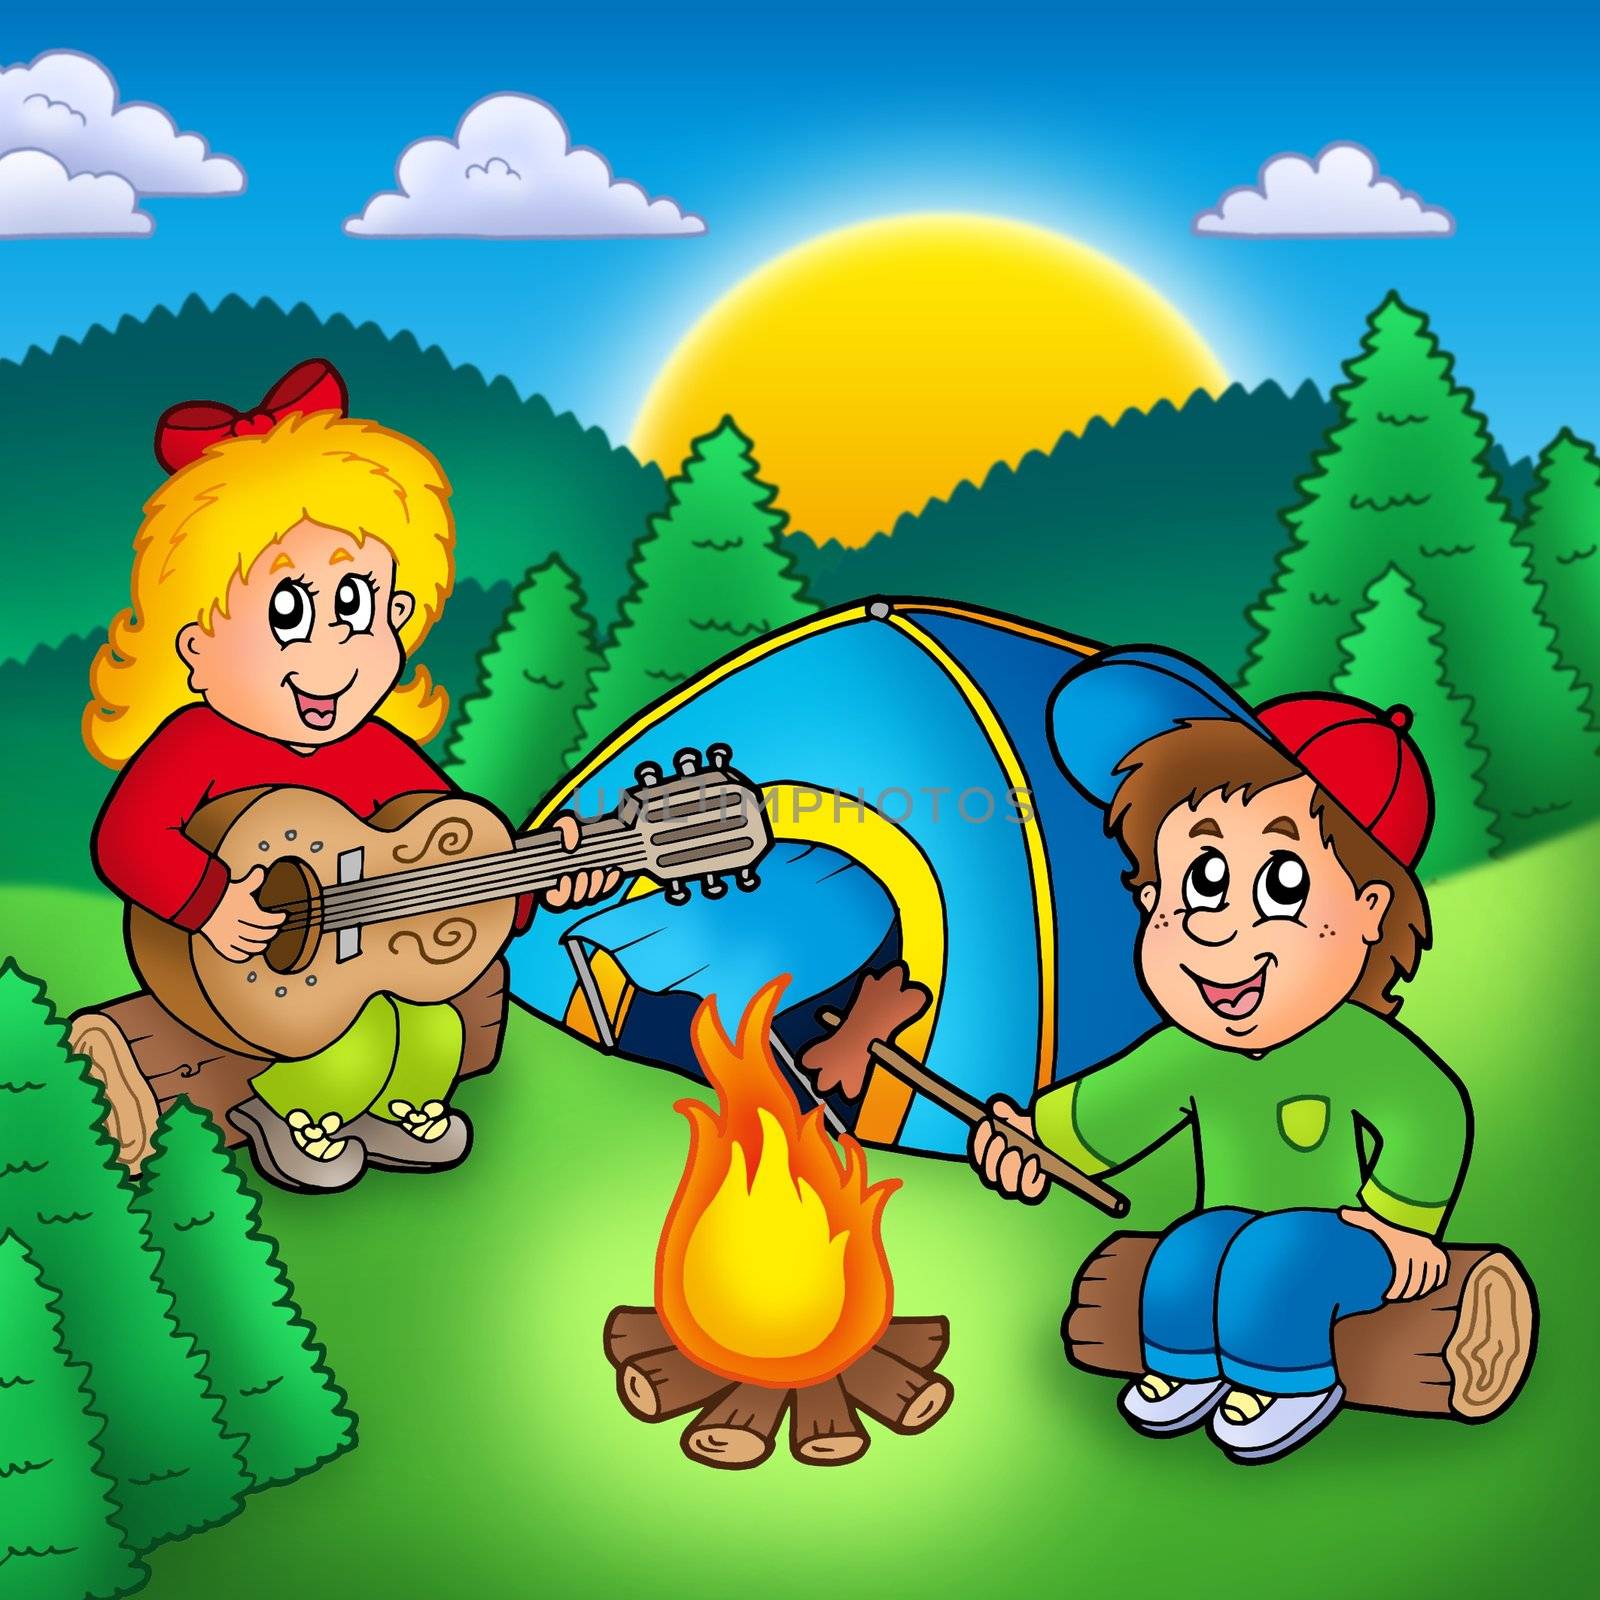 Two camping kids - color illustration.